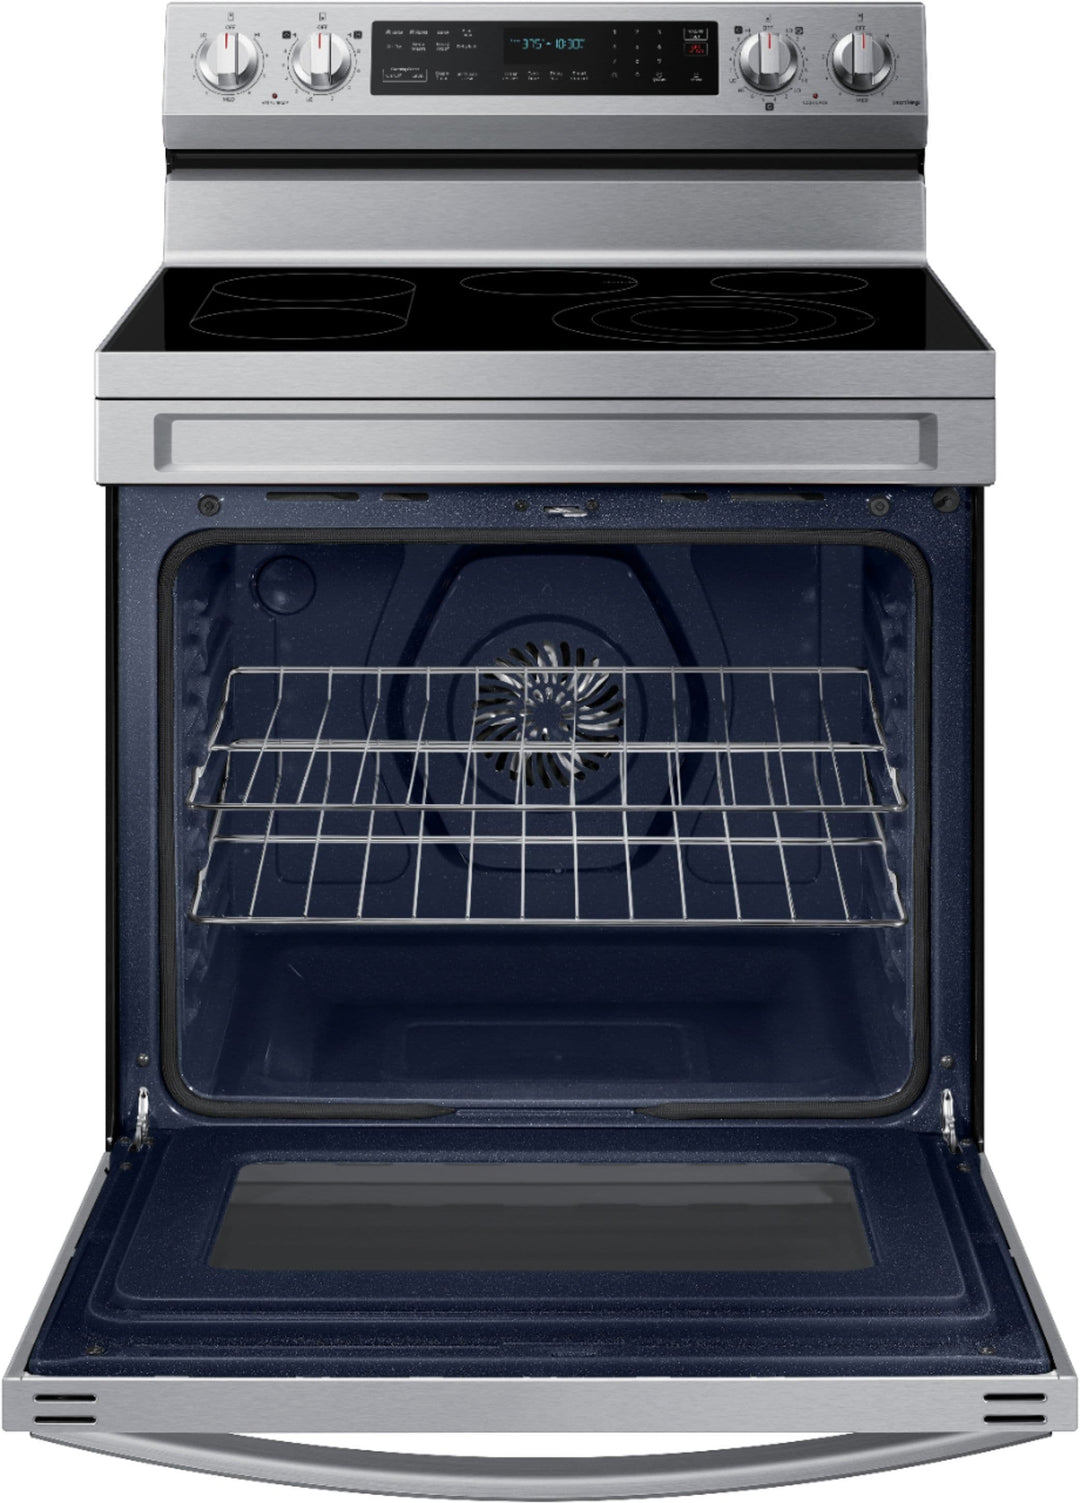 Samsung - 6.3 cu. ft. Freestanding Electric Convection+ Range with WiFi, No-Preheat Air Fry and Griddle - Stainless steel_2